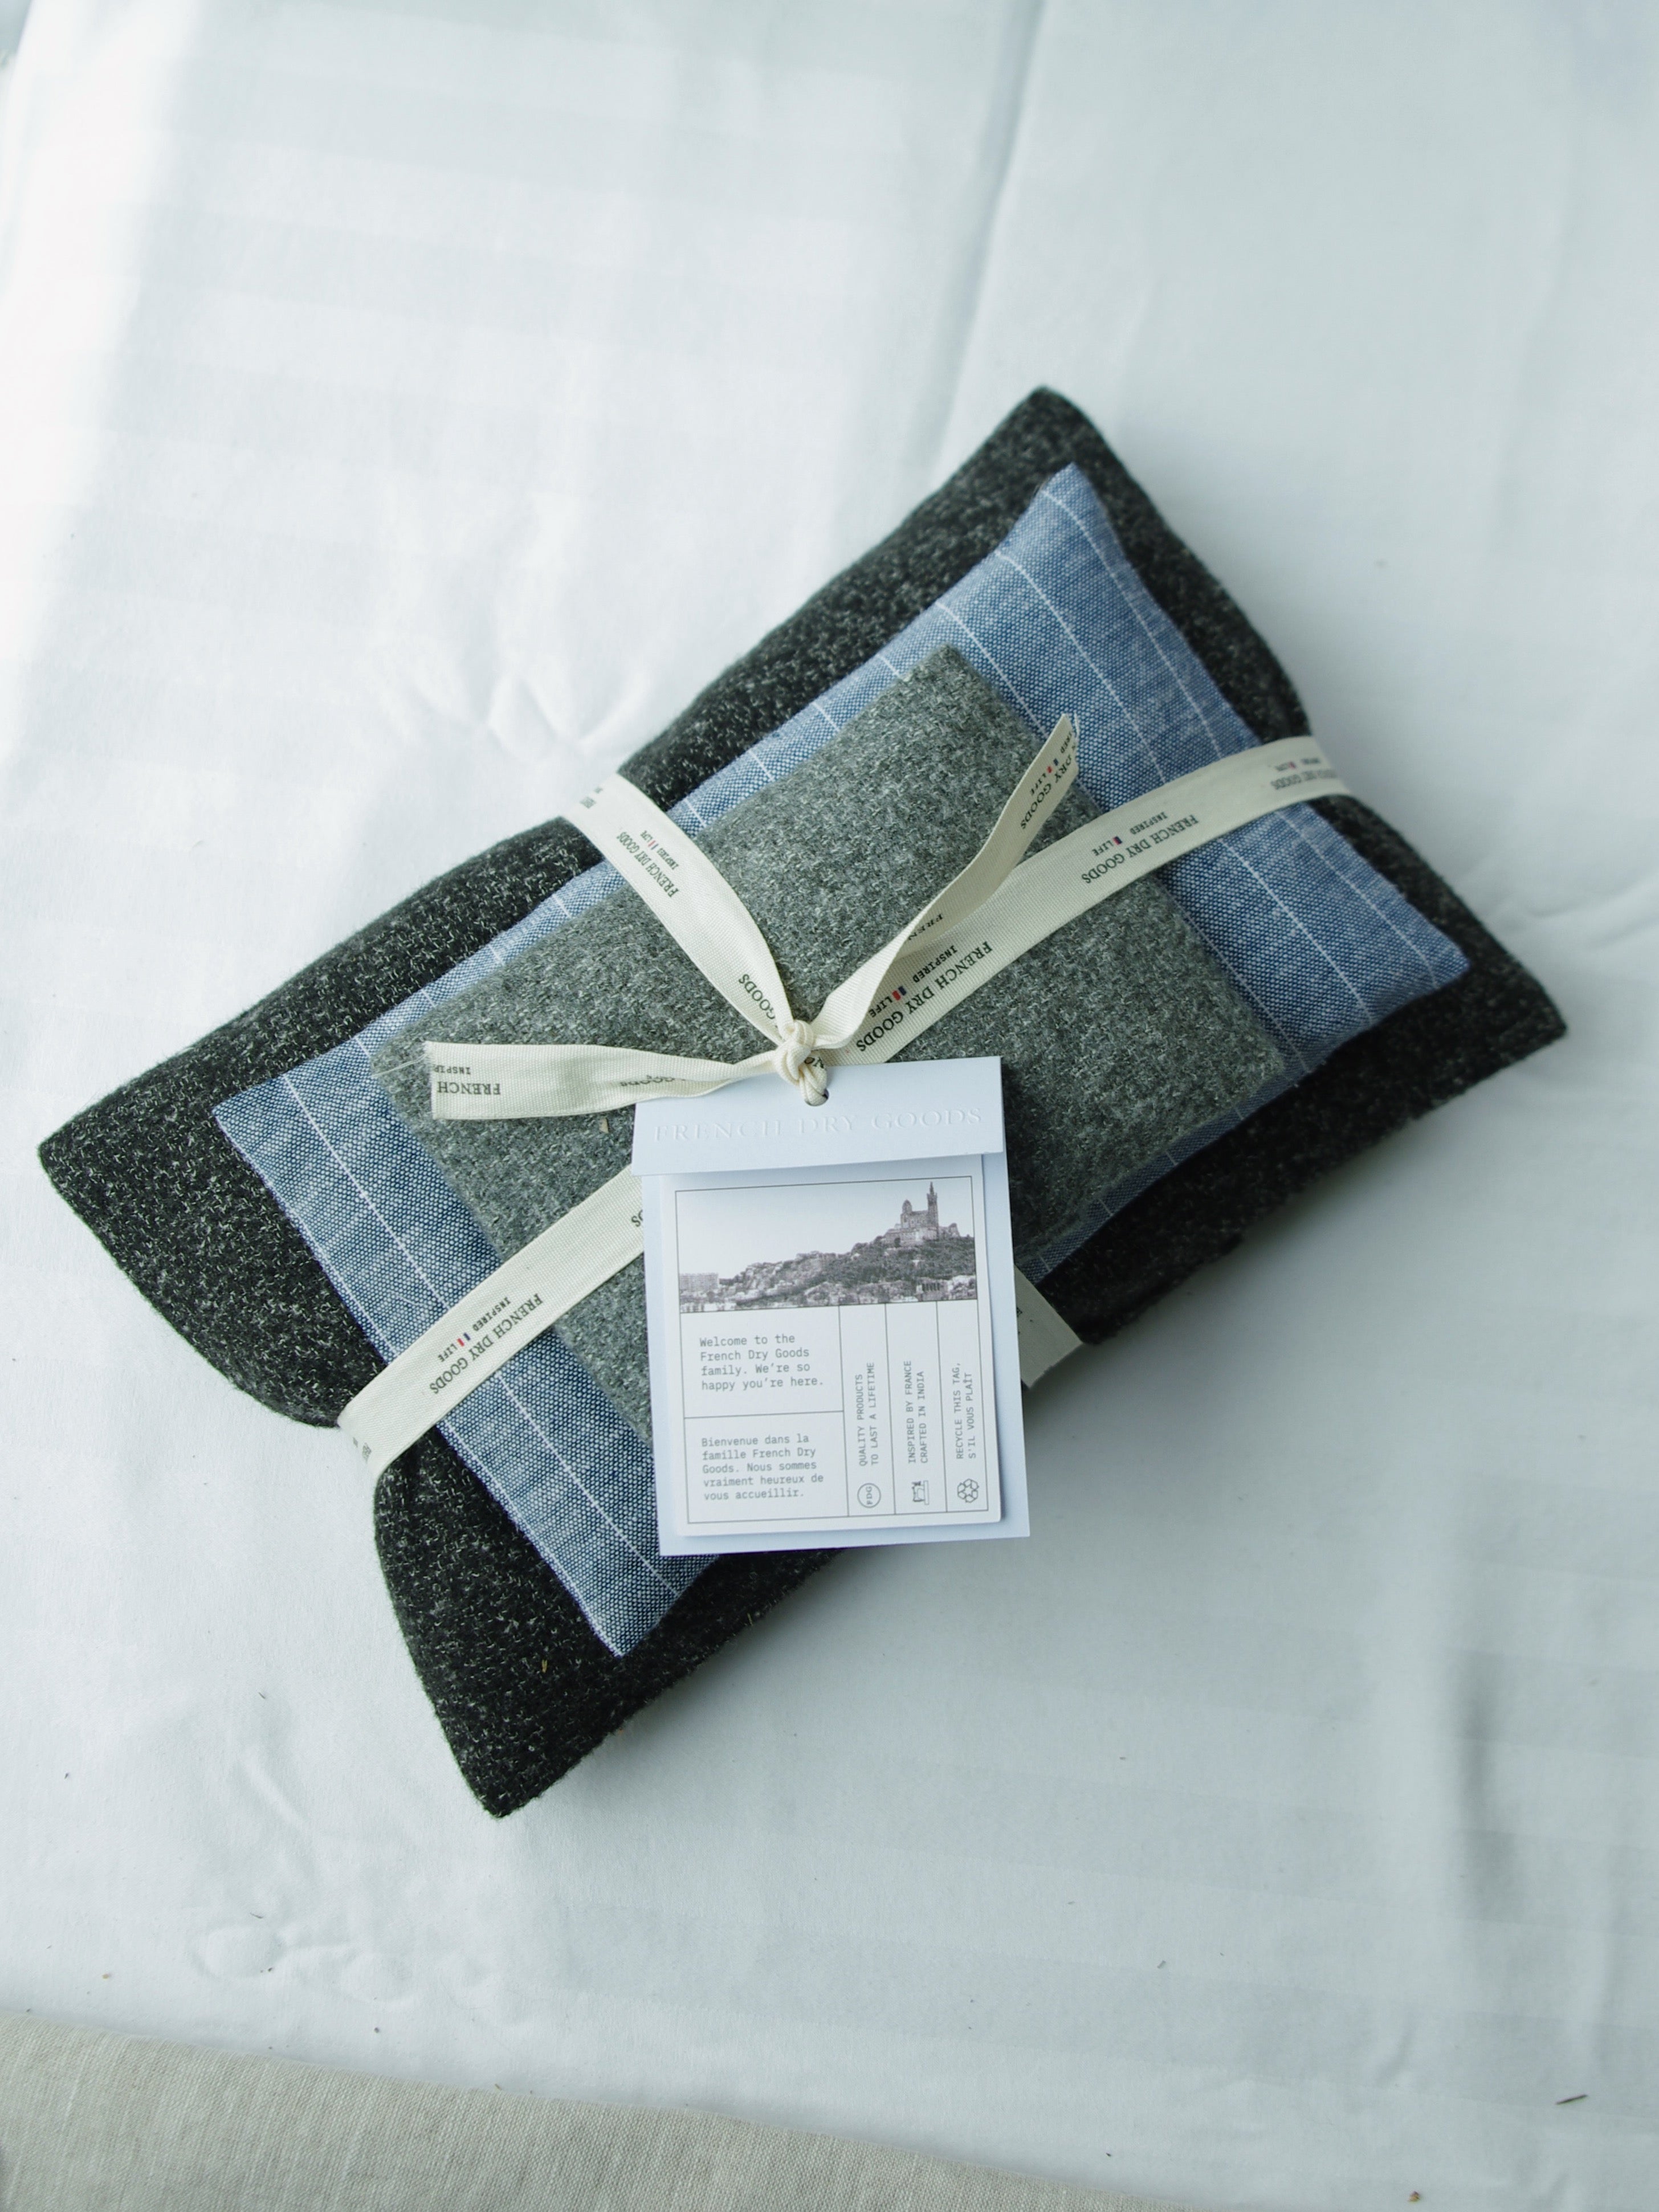 French Dry Goods Lavender Sachet Pouch - Grey Wool French Dry Goods Brand_French Dry Goods Home_Decor Home_French Nostalgia Home_Gifts Home_Provençal Style New Arrivals new arrivals 2023 A019B047-20B4-45D9-A97C-CC6549A2D524